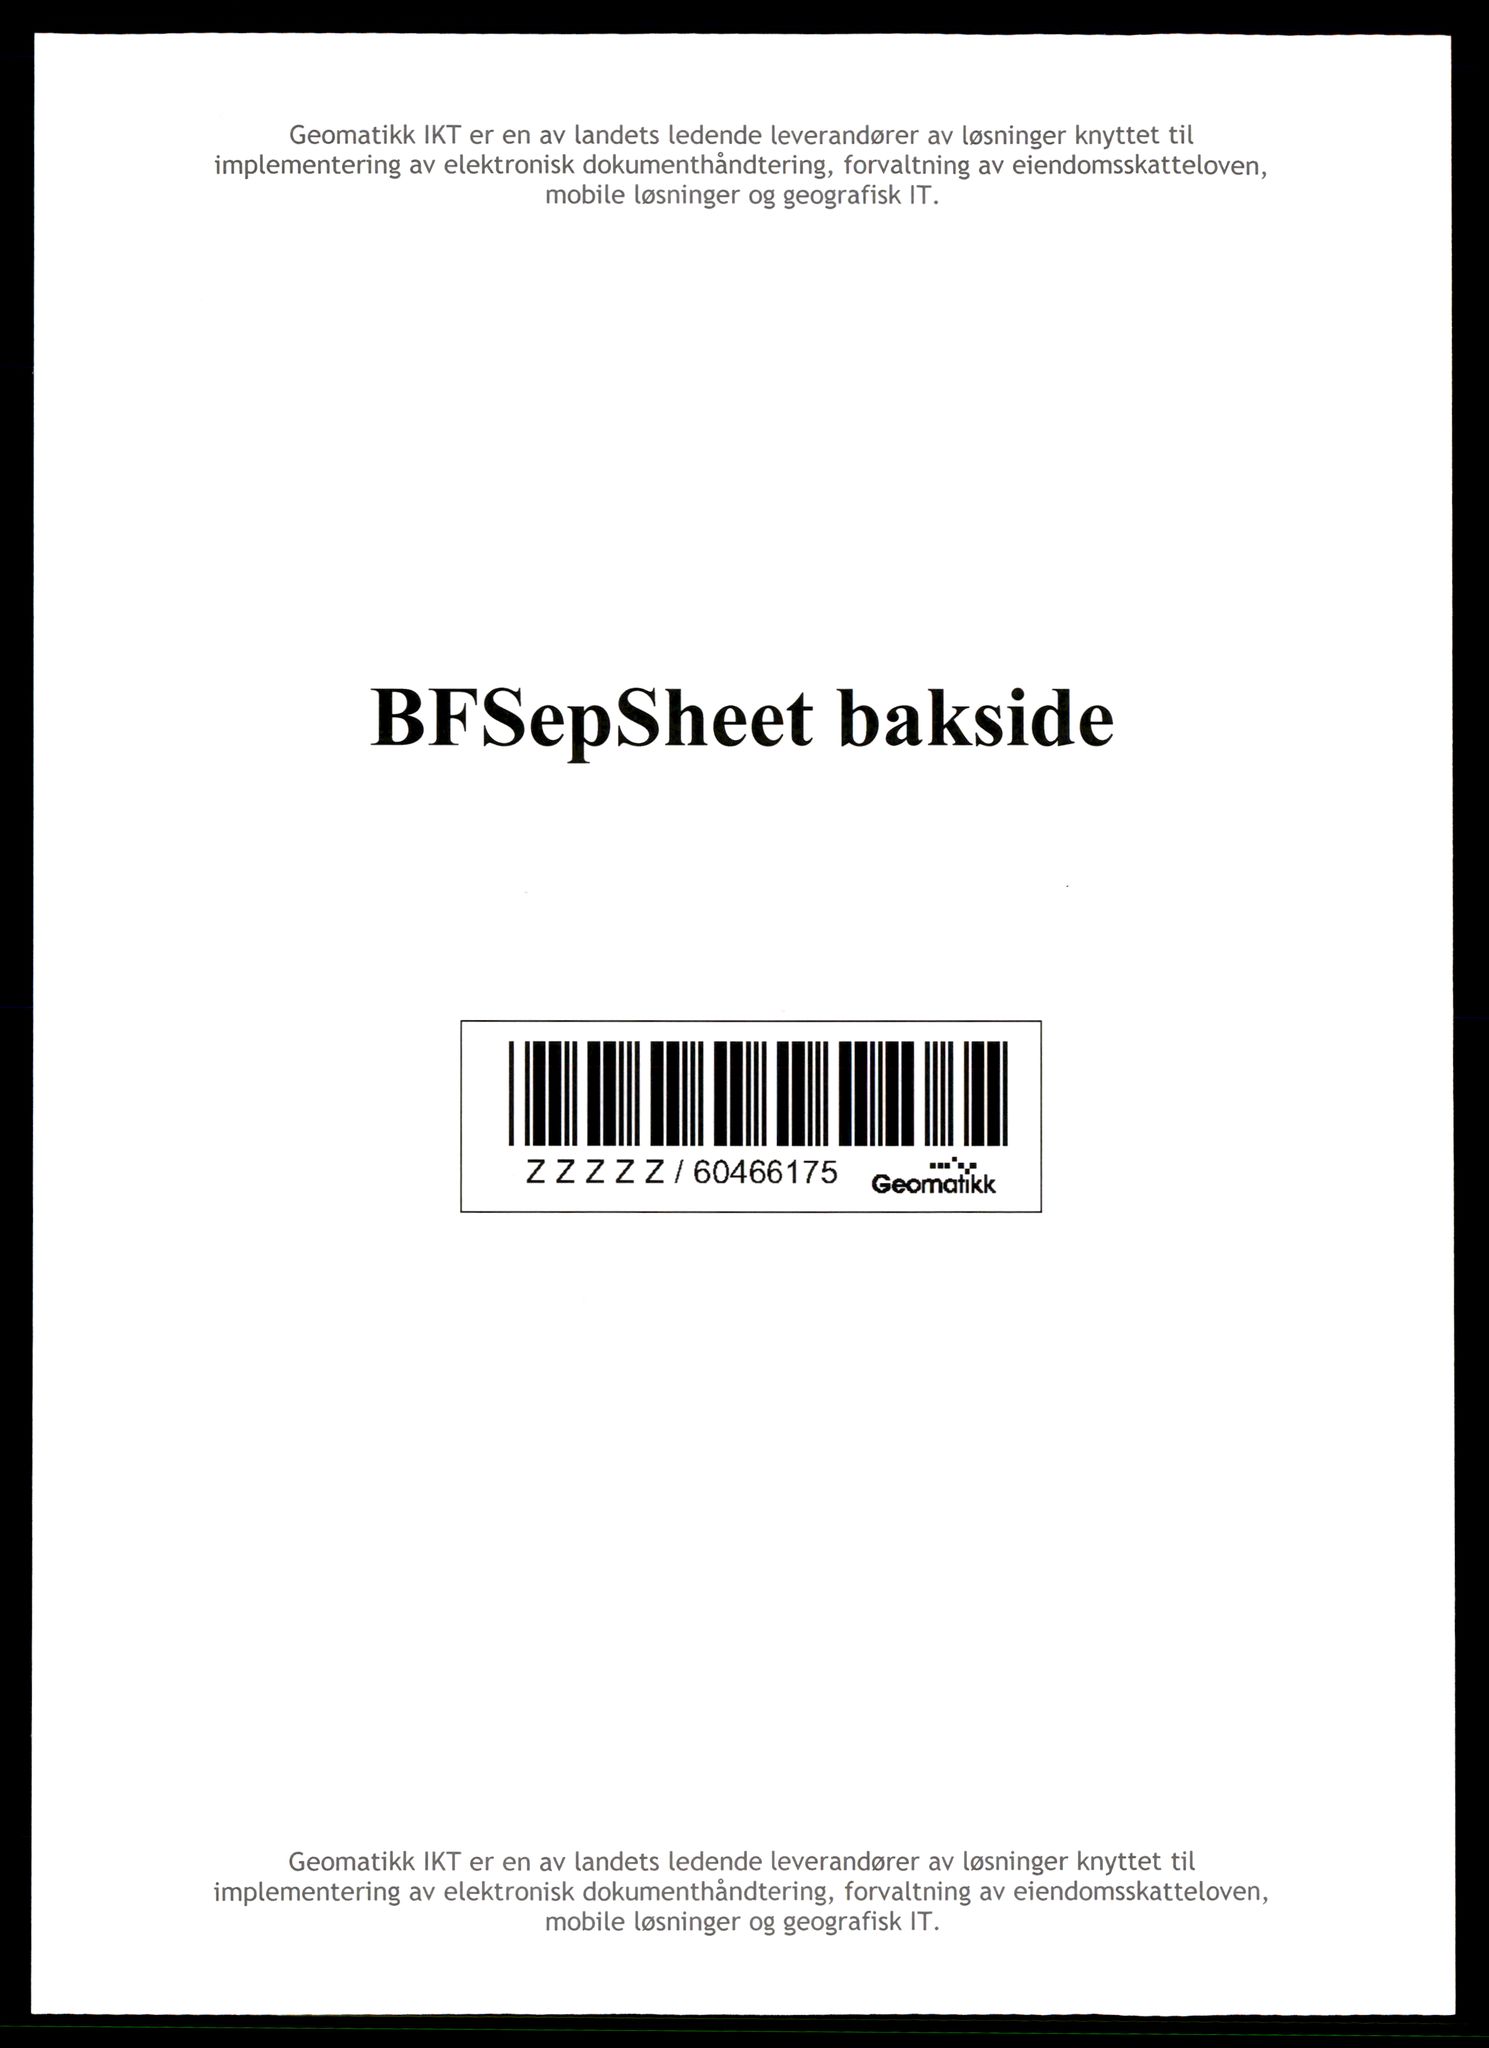 Direktoratet for mineralforvaltning , SAT/A-1562/F/L0517/4857: Rapporter / 2006 Summer geophysical surveys on the Bamble and Ertelien Projects in the Telemark and Buskerud Norway. Appendix E: Logistics Report 2006 UTEM Survey Ertelien Project-summer.
Med CD, 2006, s. 2